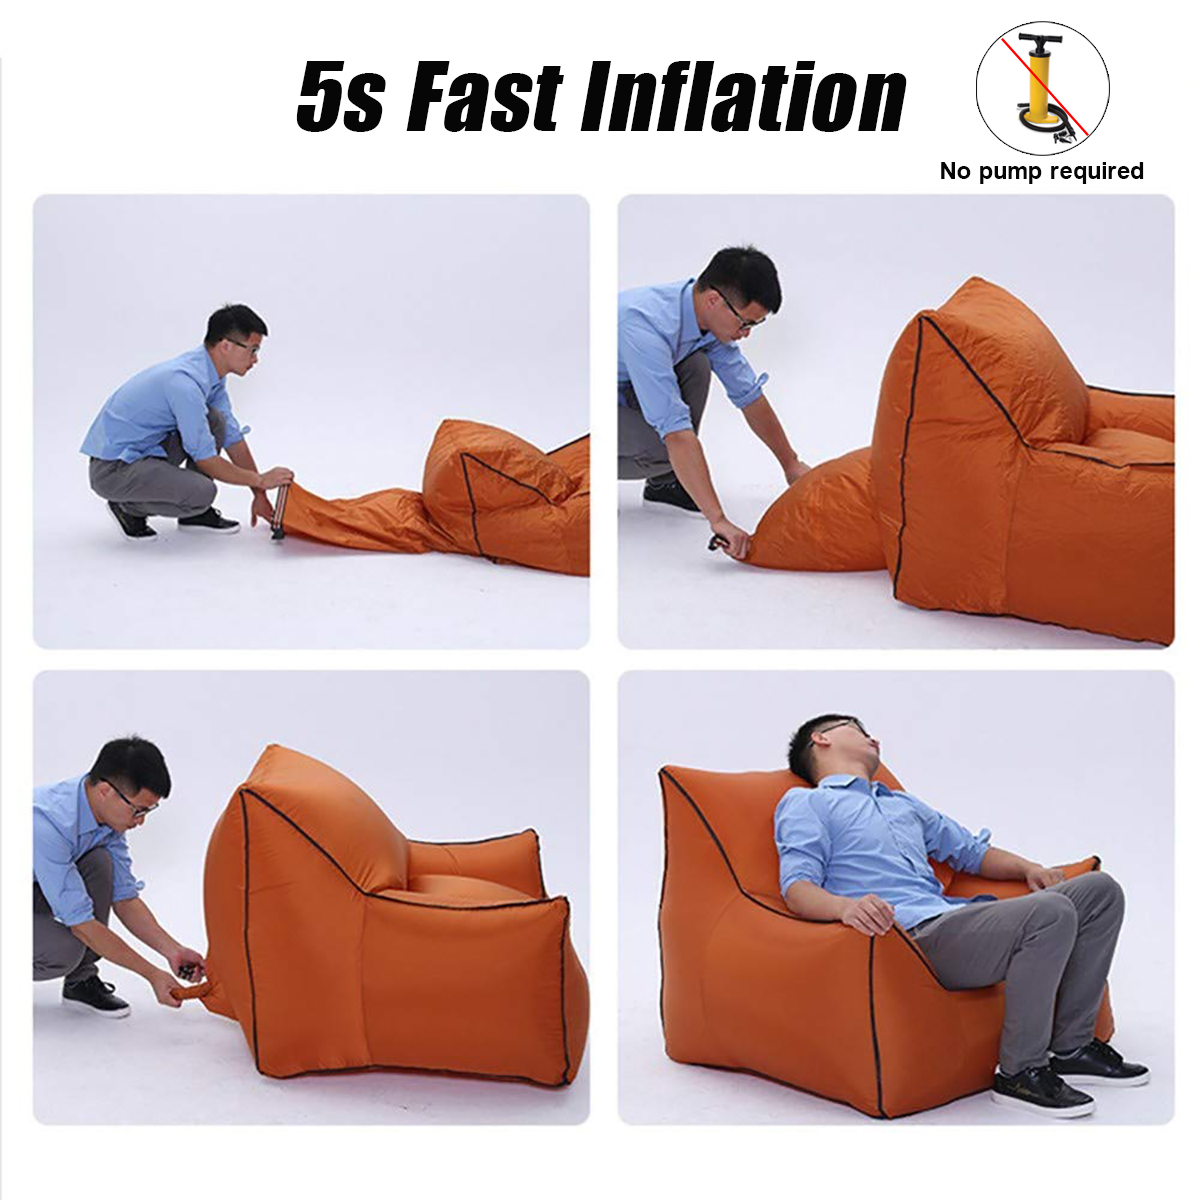 Outdoor Portable Inflatable Air Lazy Sofa Sleeping Rest Beach Seaside Couch Bed Camping Travel 7